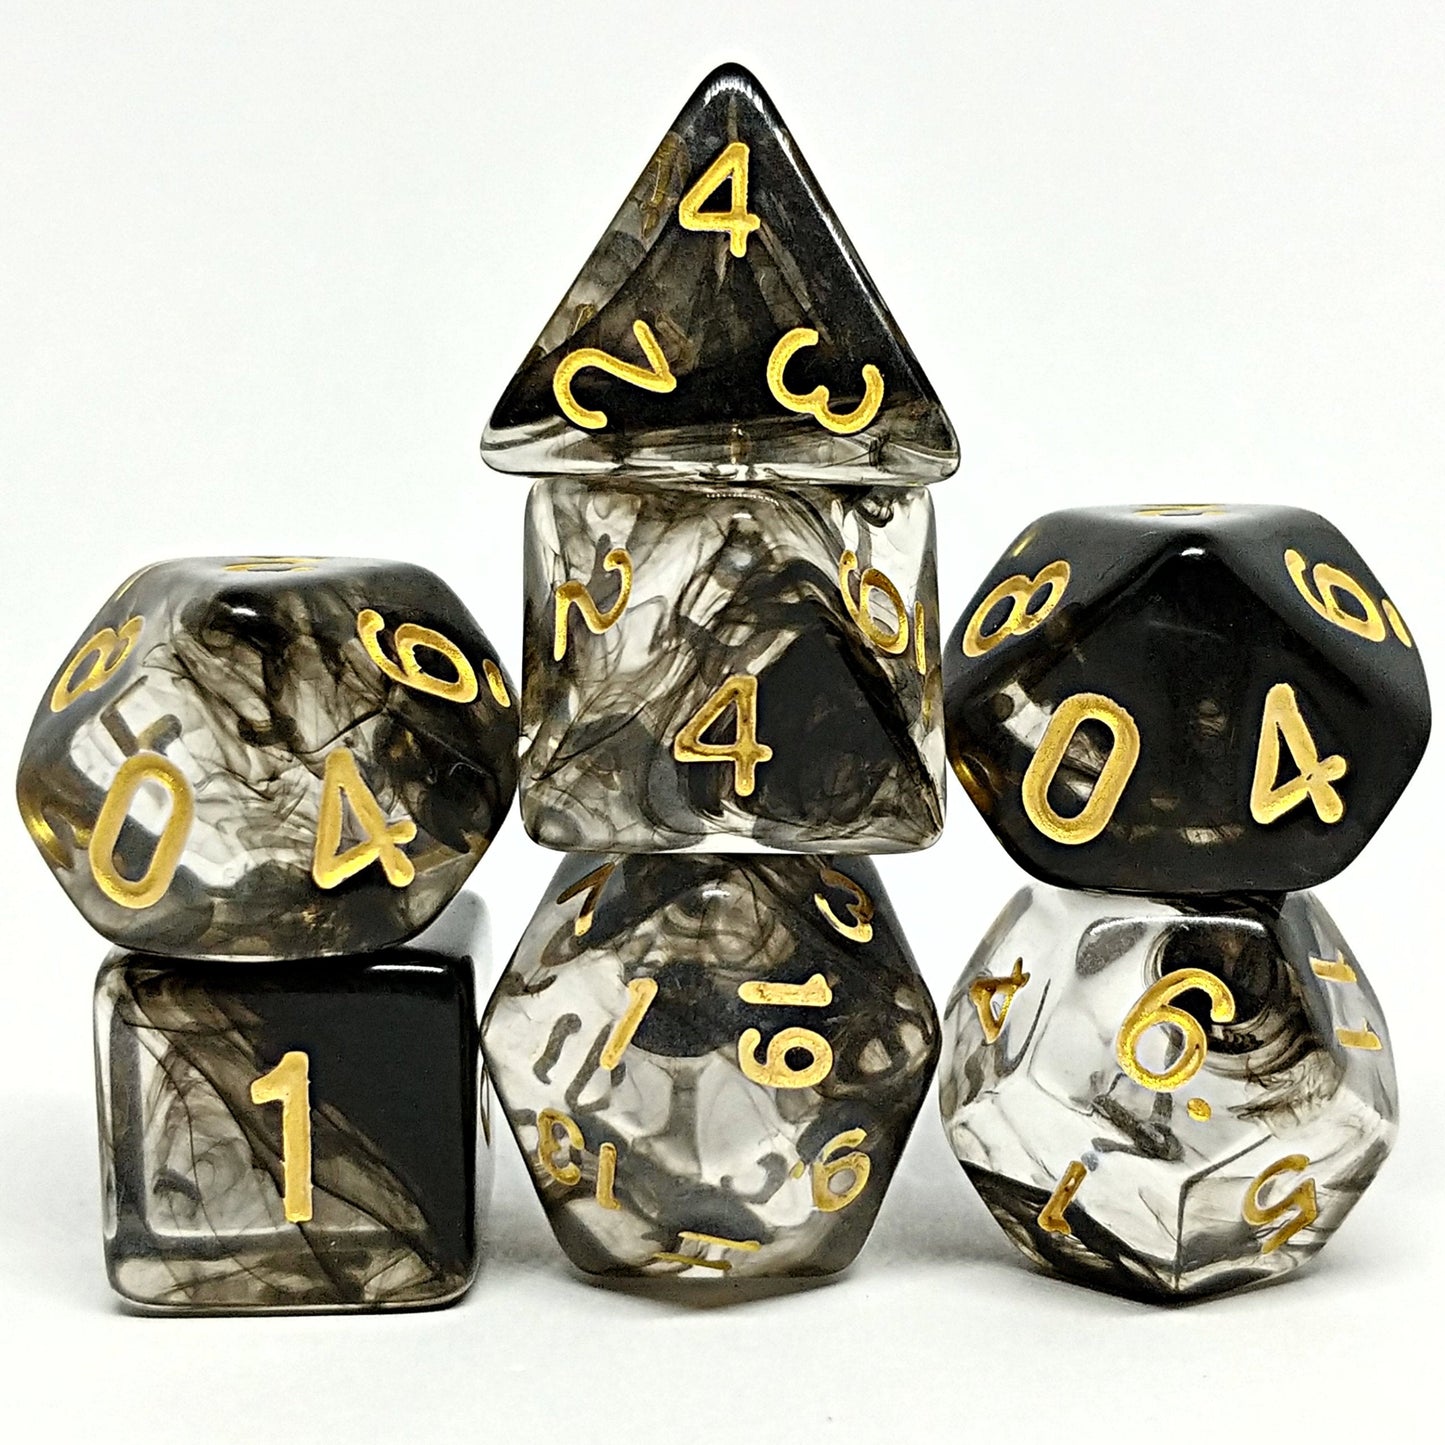 FREE Today: Void Genesis DnD Dice Set